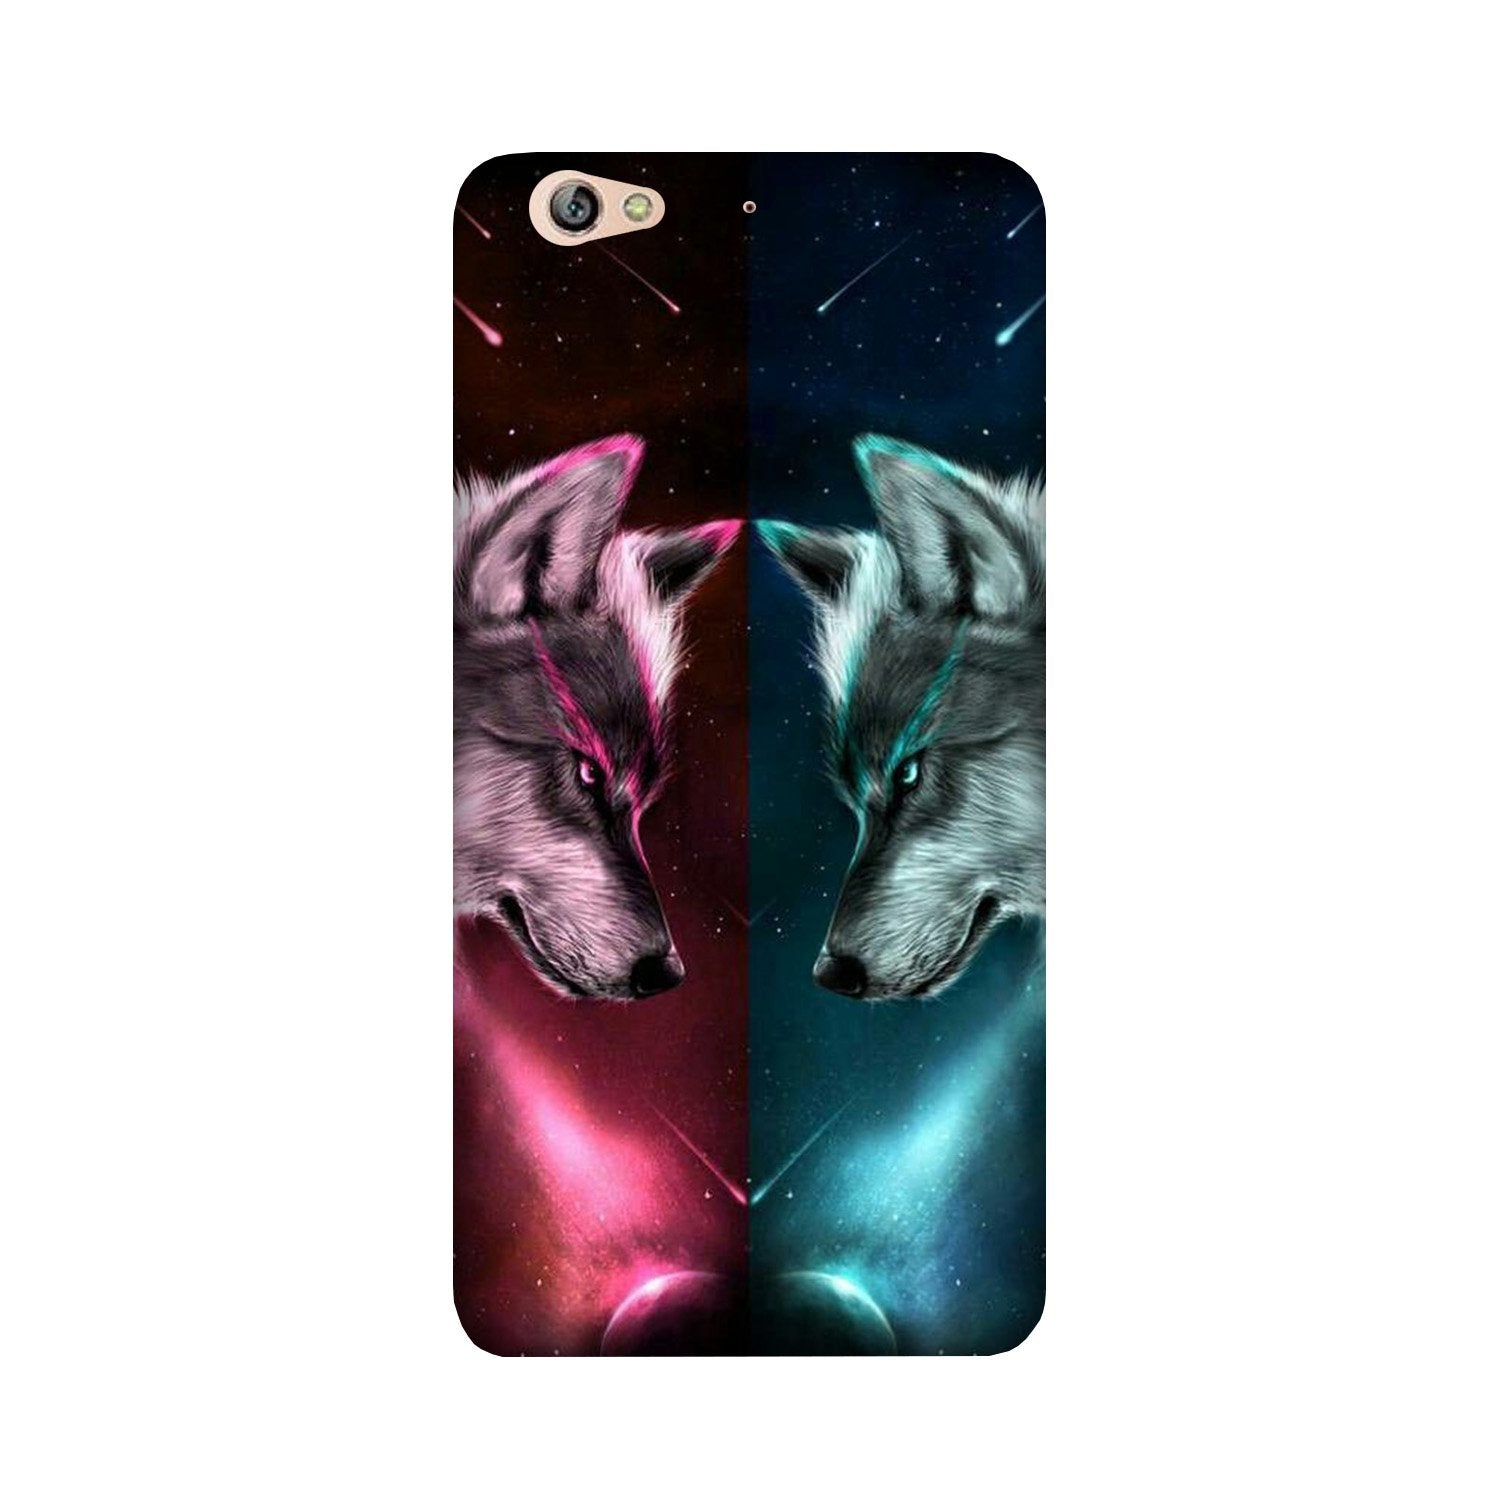 Wolf fight Case for Gionee S6 (Design No. 221)